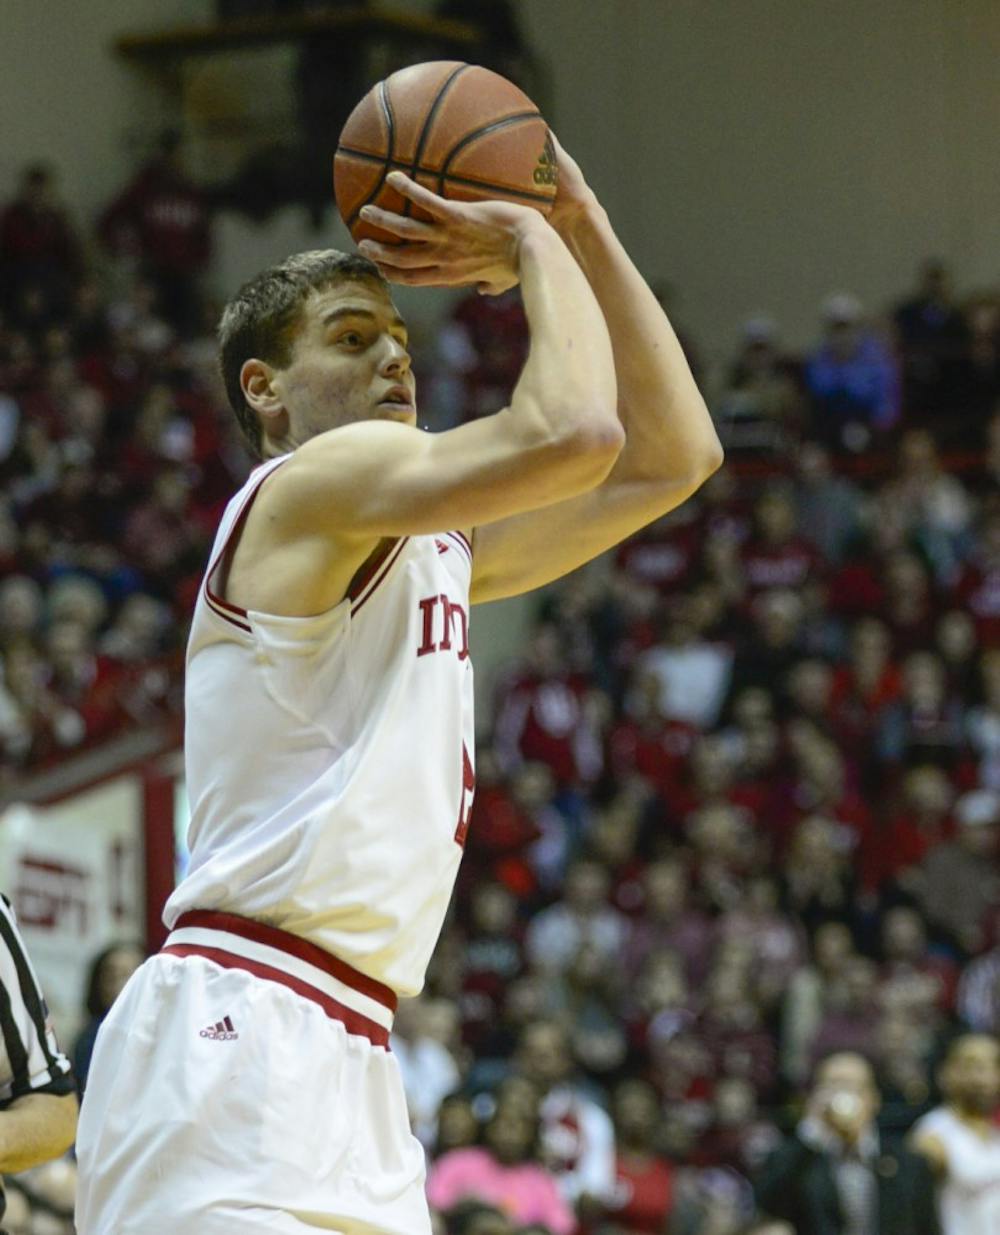 Junior guard Nick Zeisloft shoots a three-point shot during IU's game against Michigan State on Saturday at Assembly Hall.